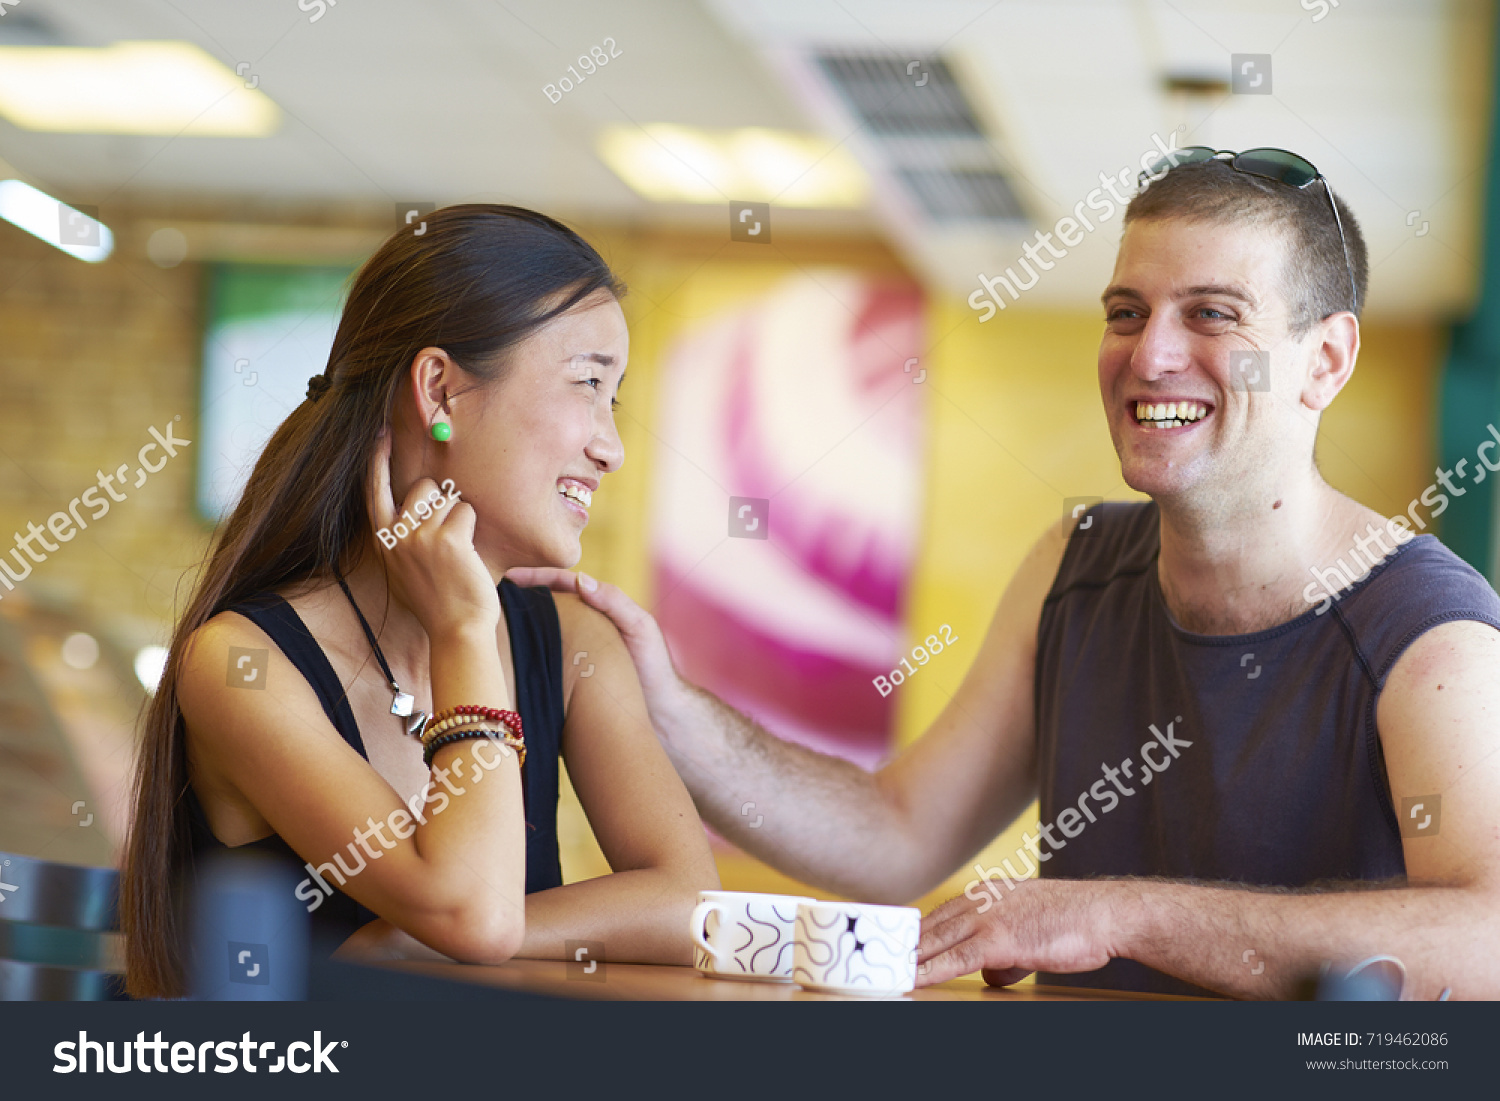 stock-photo-happy-asian-girl-talking-with-white-man-in-the-cafe-719462086.jpg